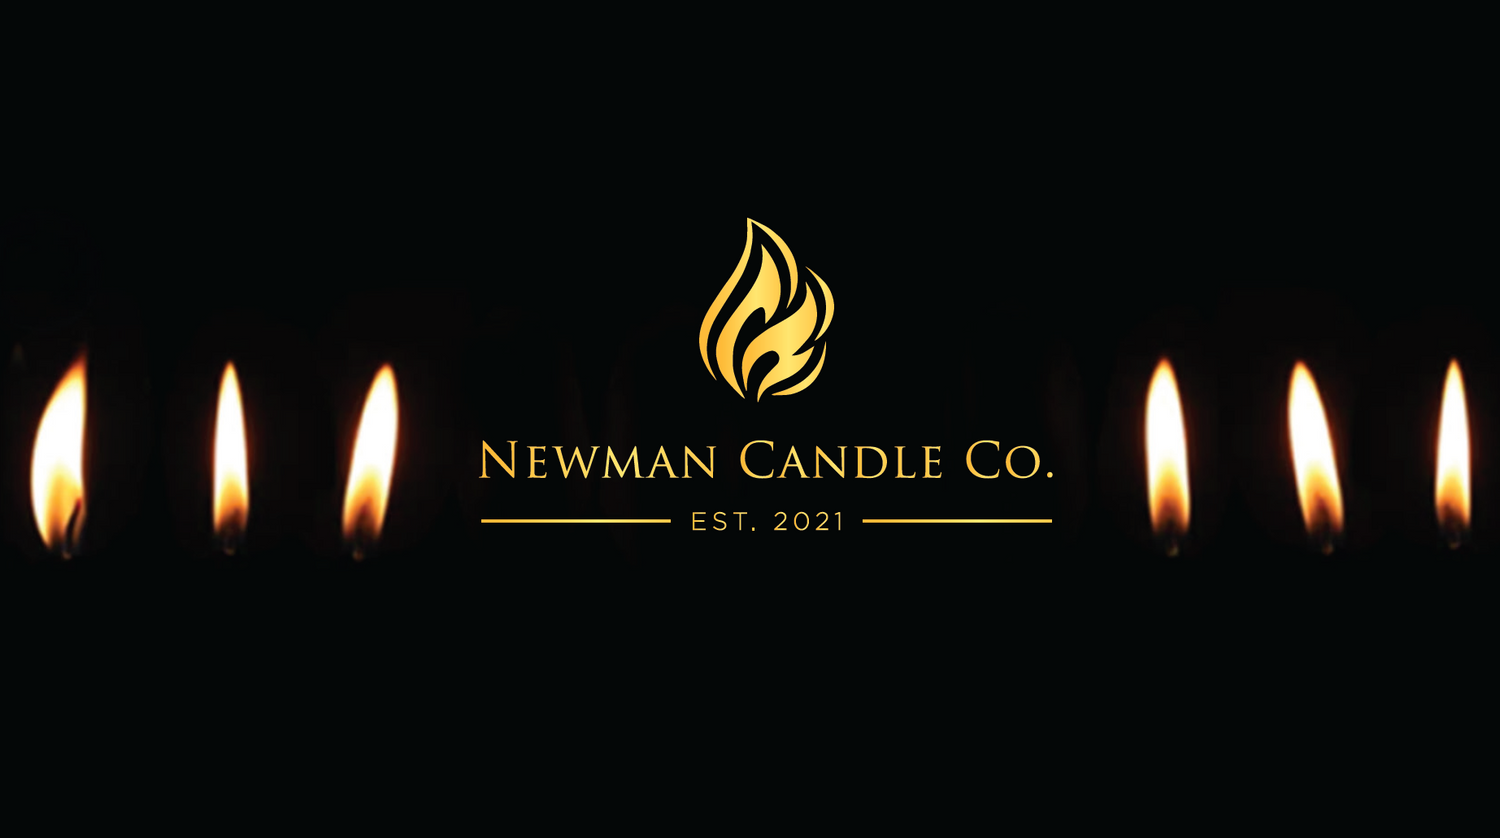 Newman Candle Co.